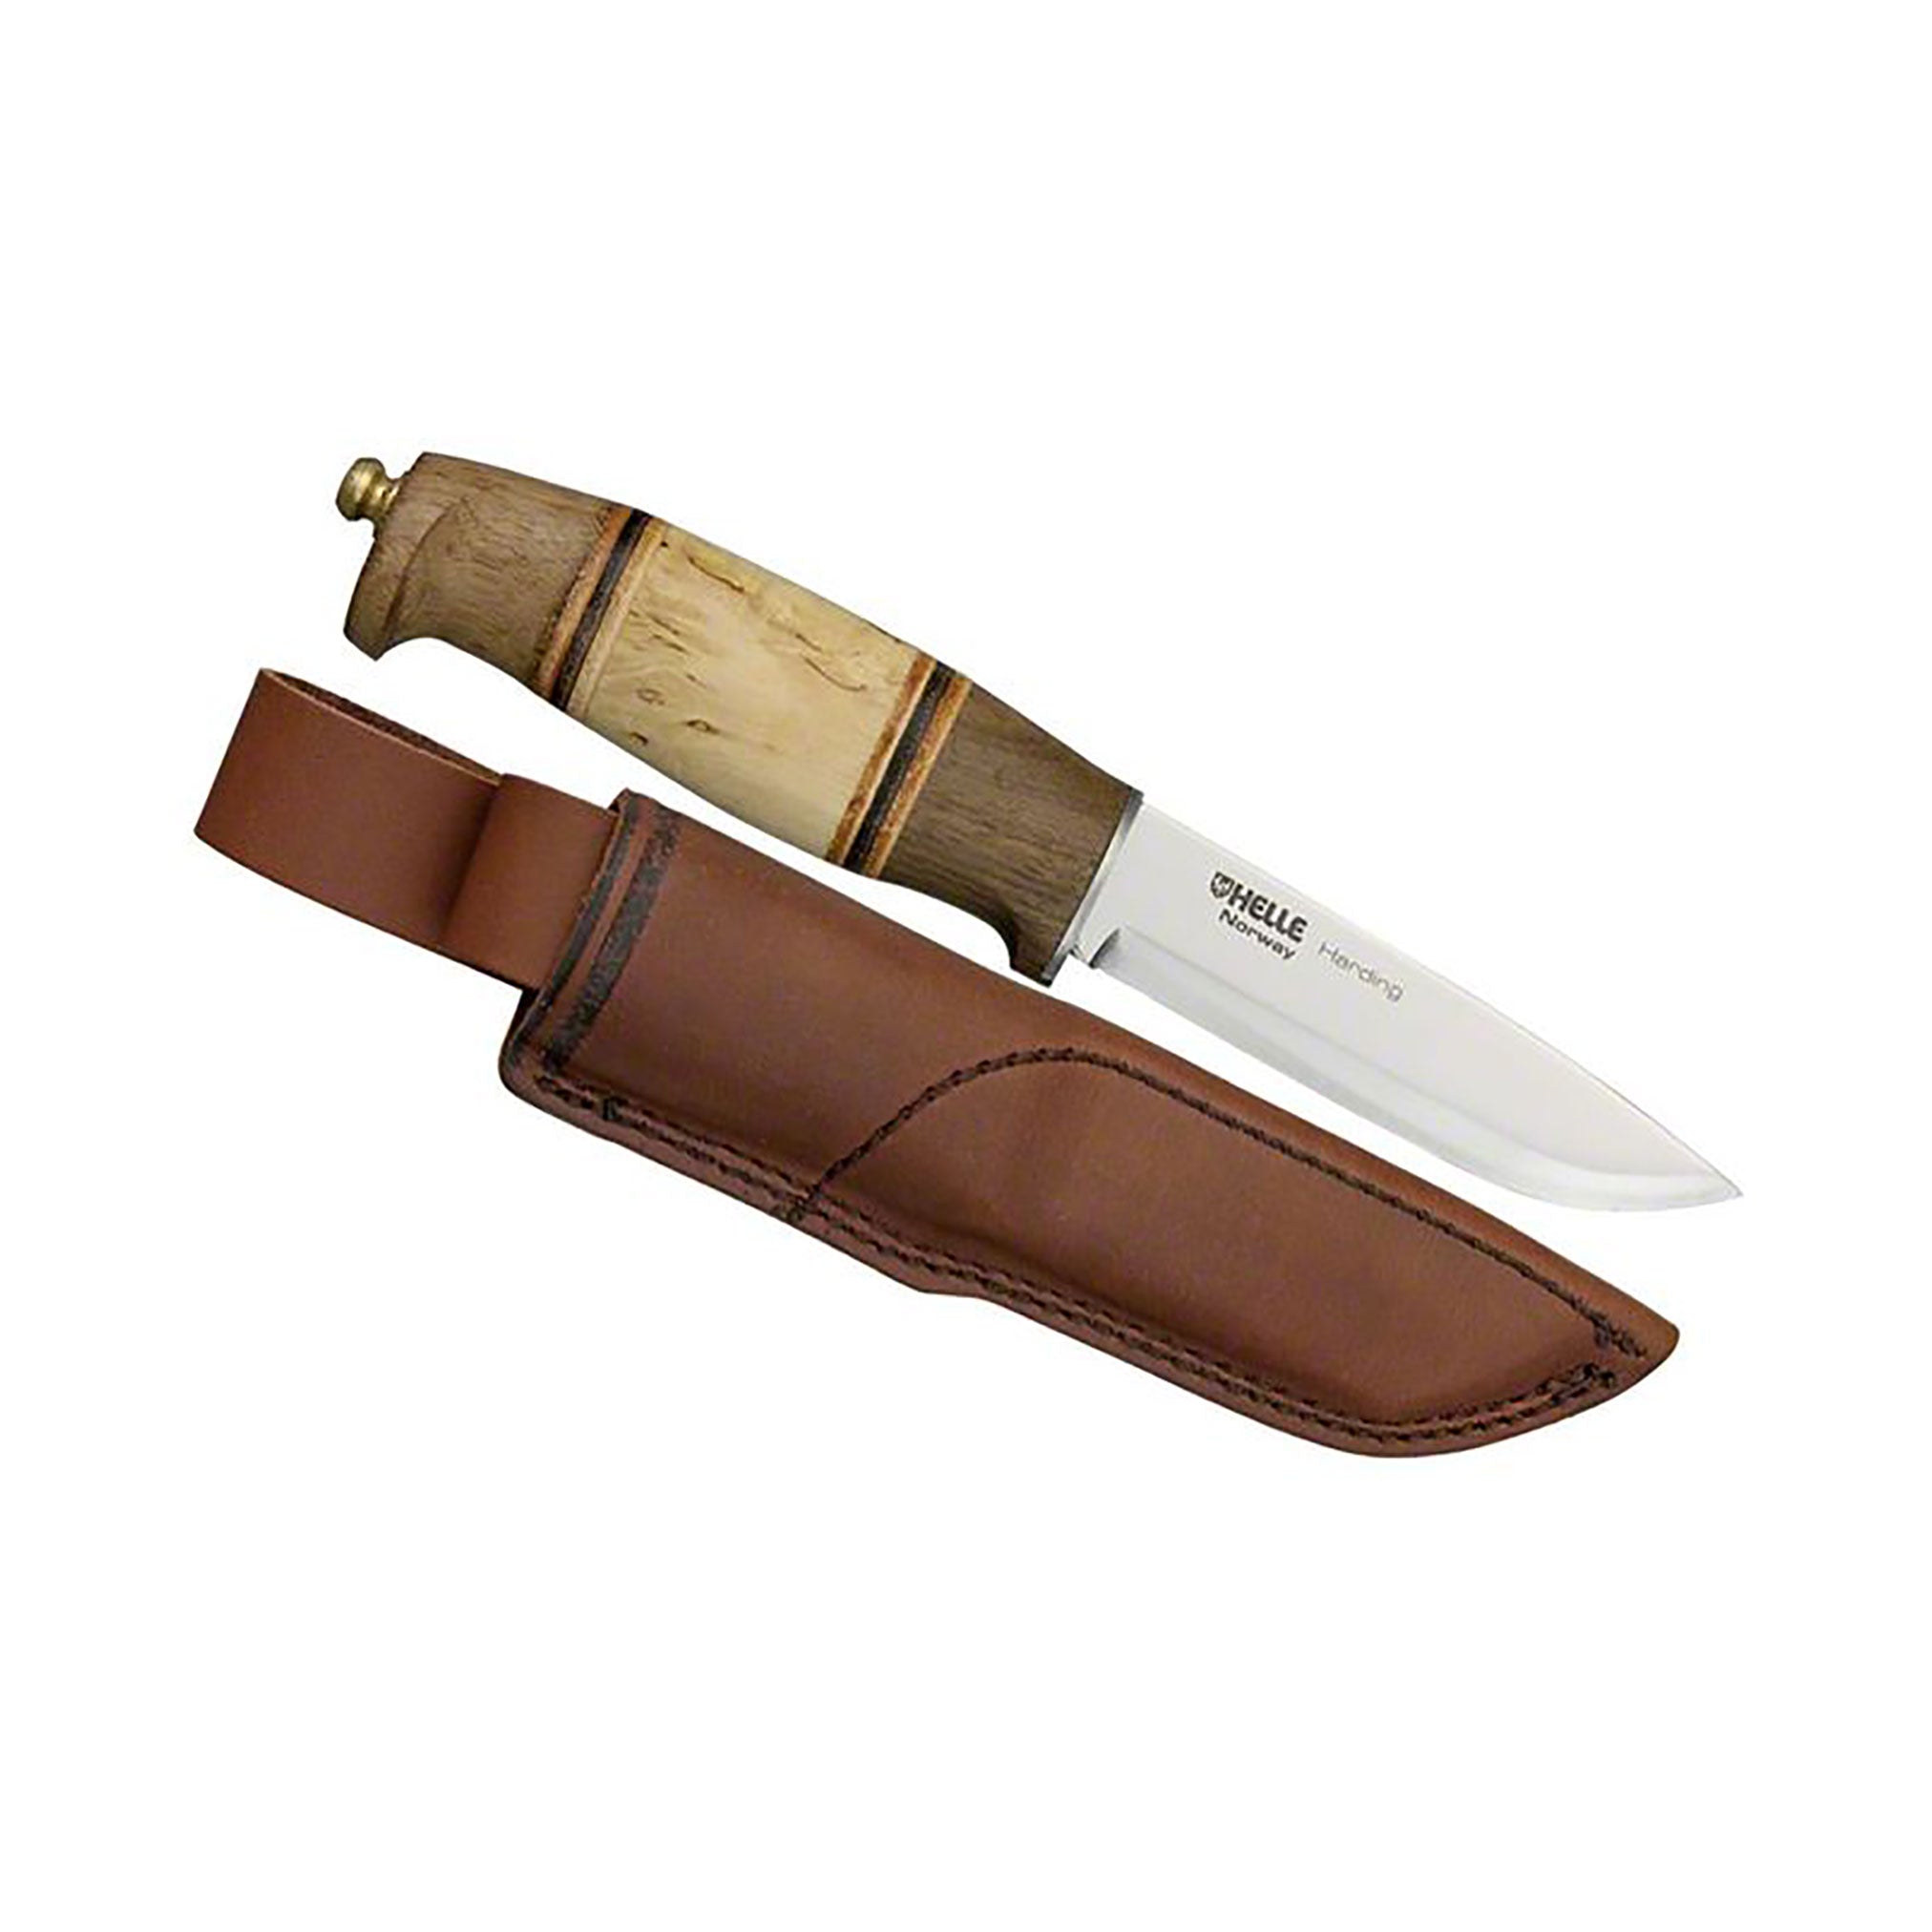 Helle Harding Knife 4" Blade Walnut and Curly Handle